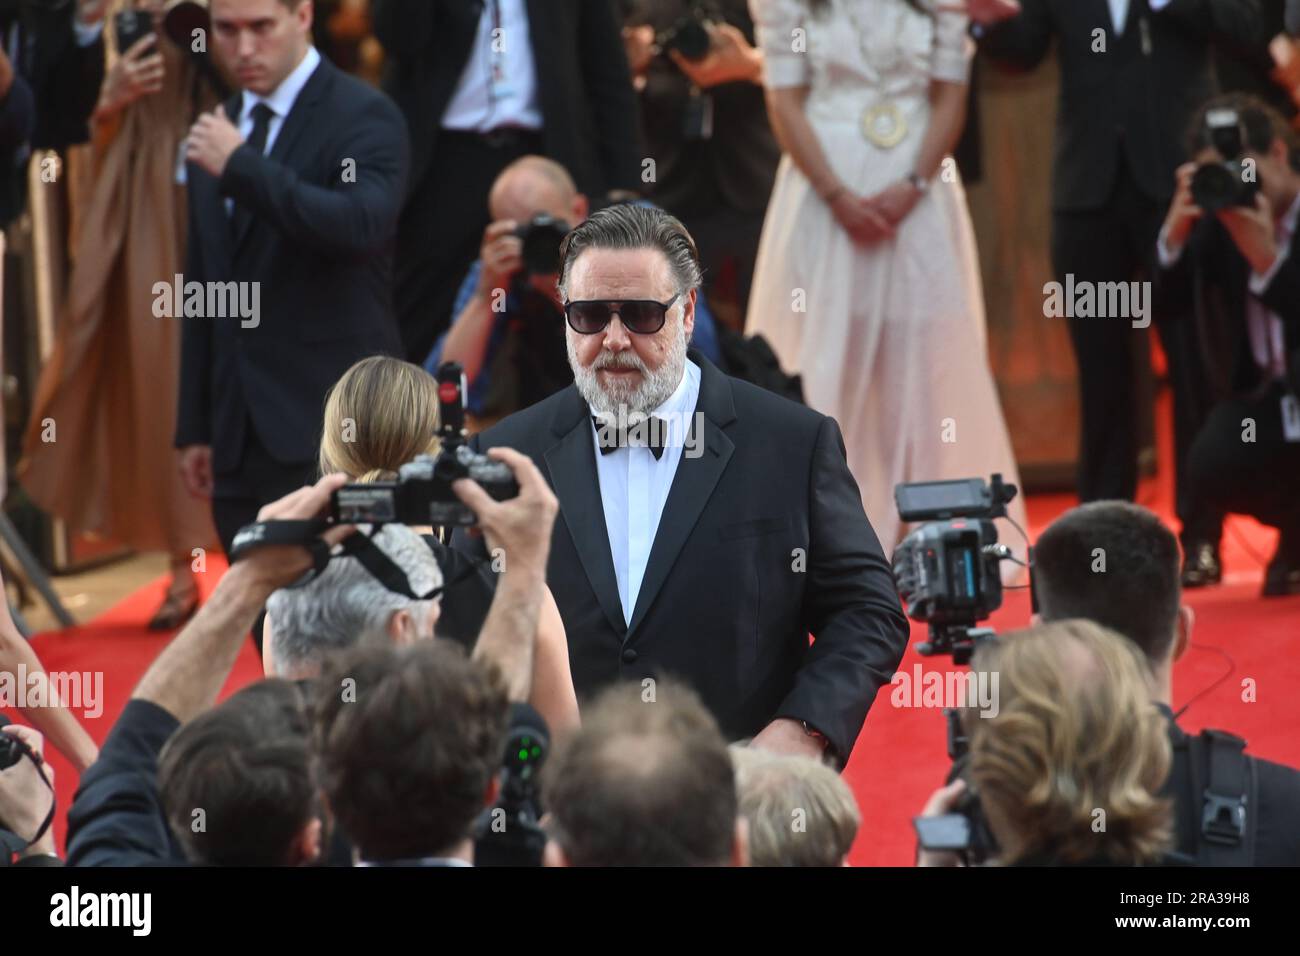 Karlovy Vary, Czech Republic. 30th June, 2023. Actor Russell Crowe arrives at the opening of the 57th Karlovy Vary International Film Festival (KVIFF), on June 30, 2023, in Karlovy Vary, Czech Republic. Credit: Slavomir Kubes/CTK Photo/Alamy Live News Stock Photo